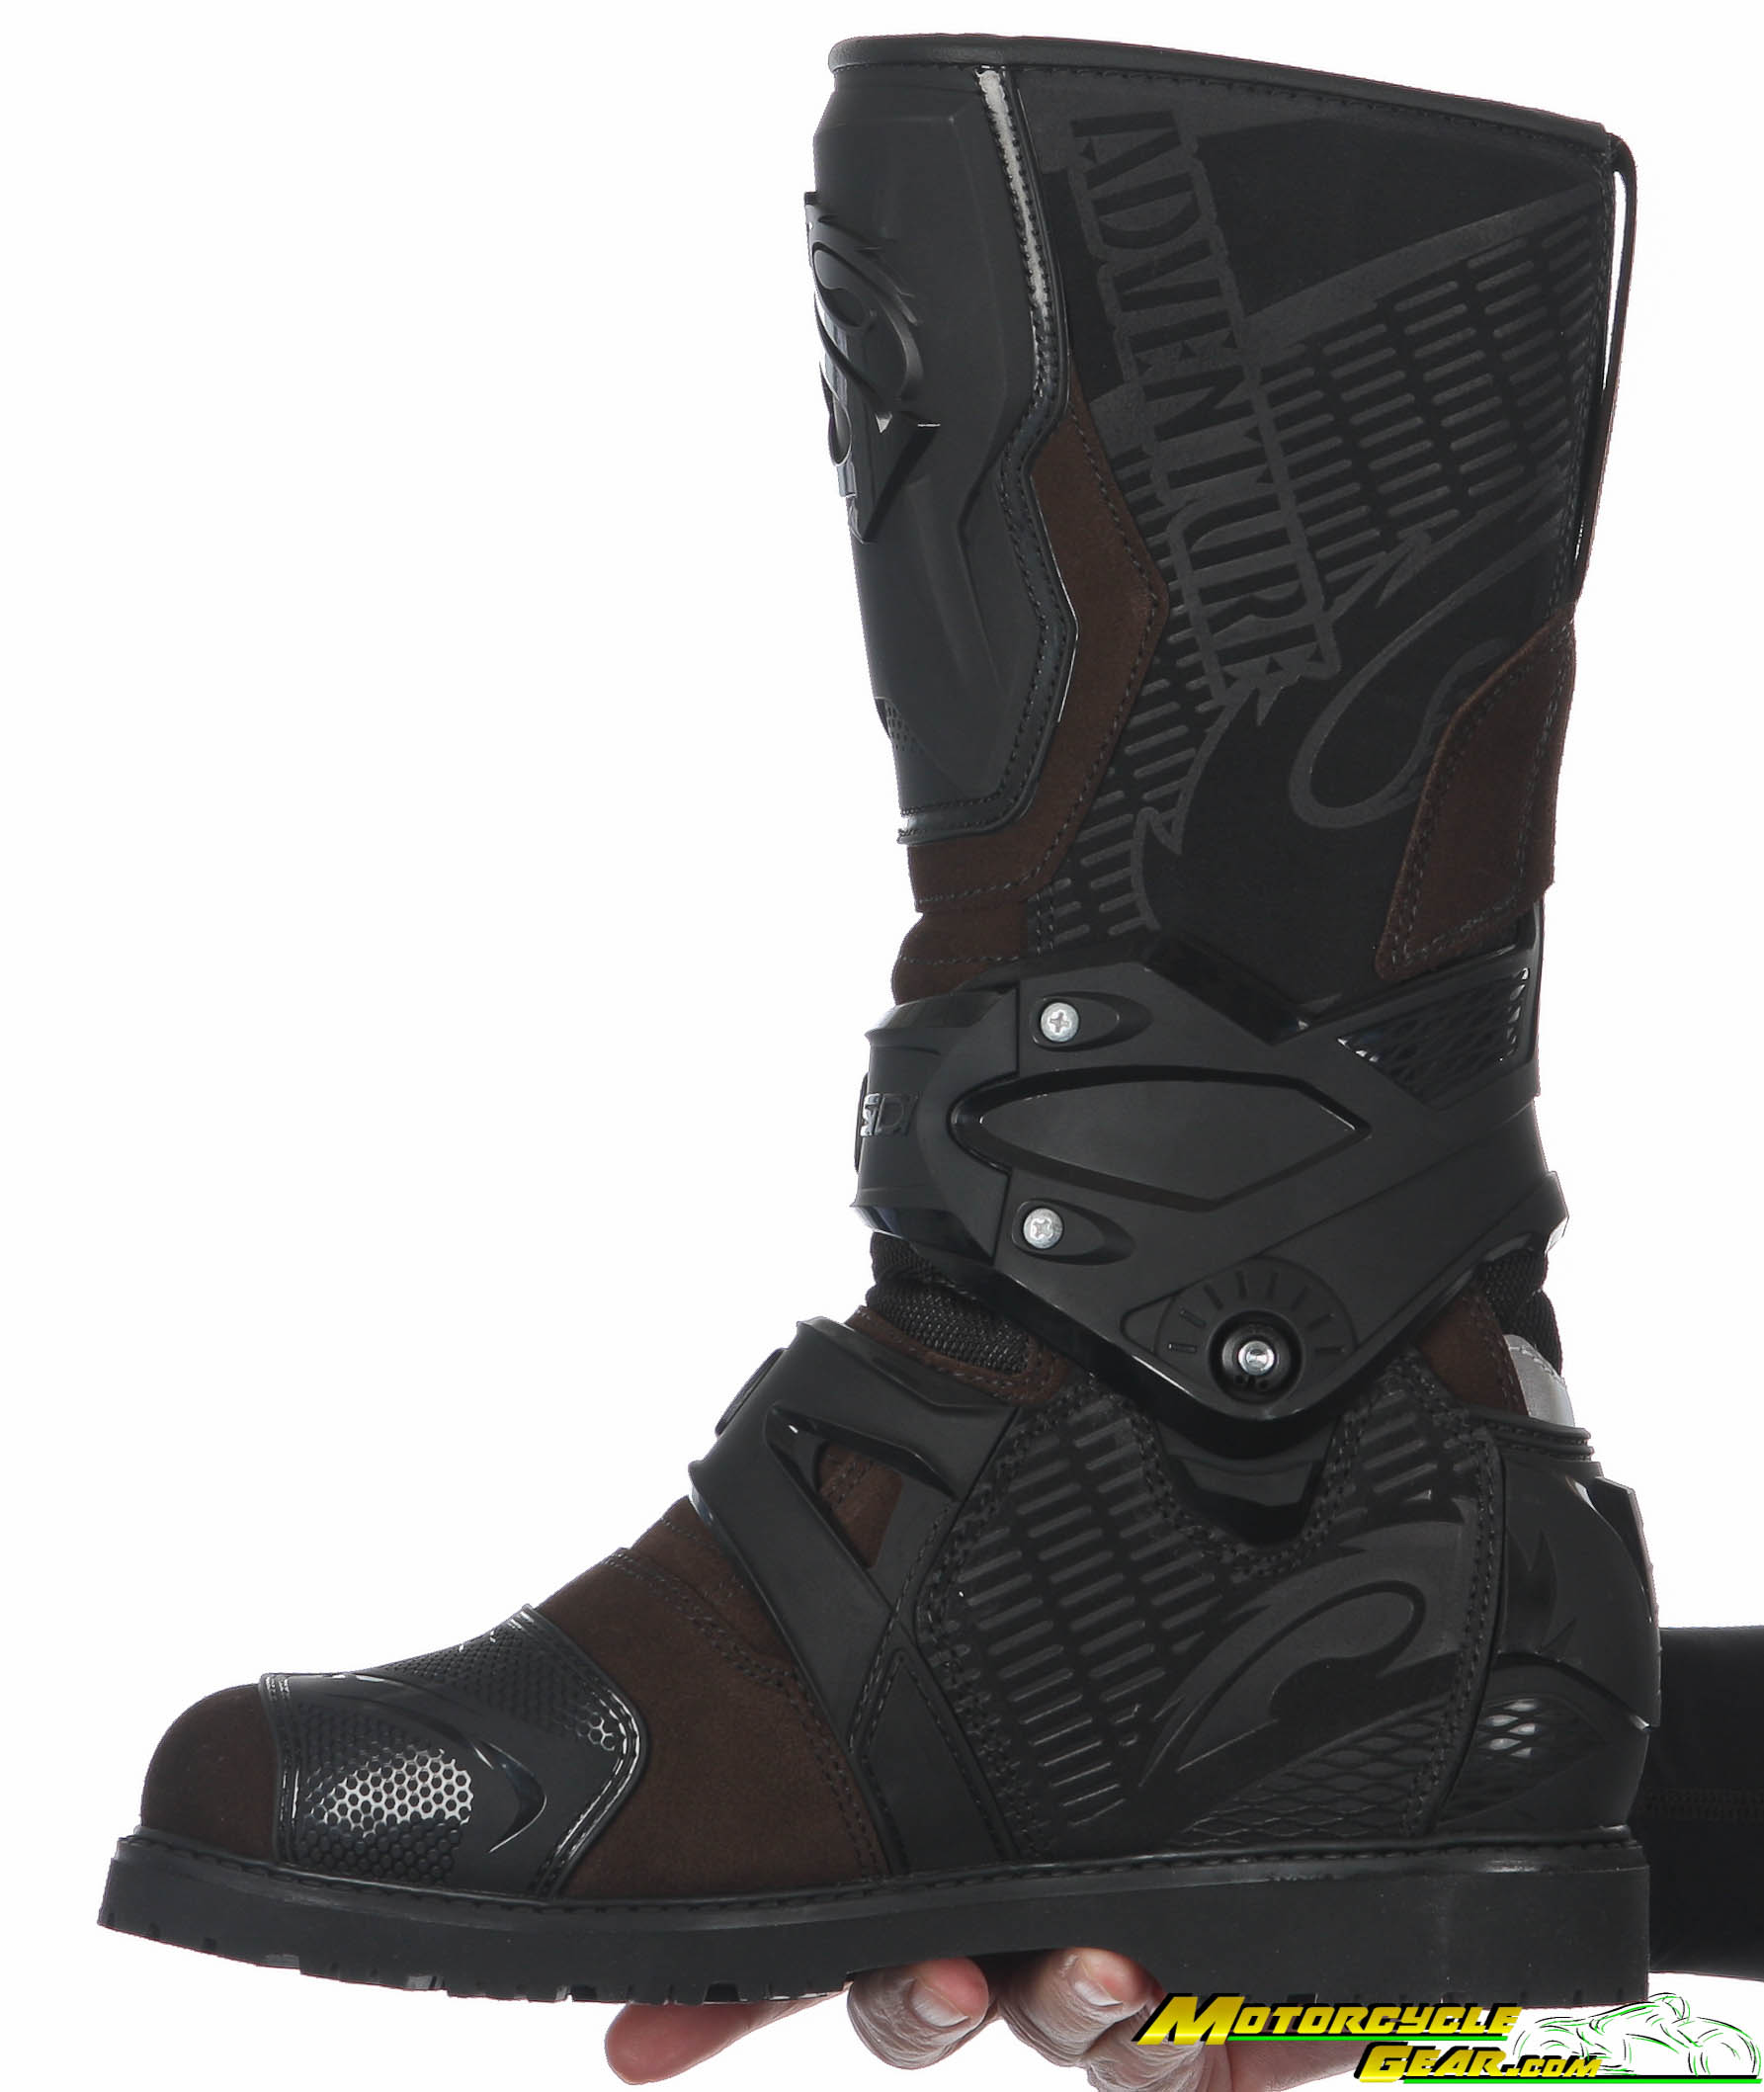 Viewing Images For Sidi Adventure 2 Gore-Tex Boots :: MotorcycleGear.com